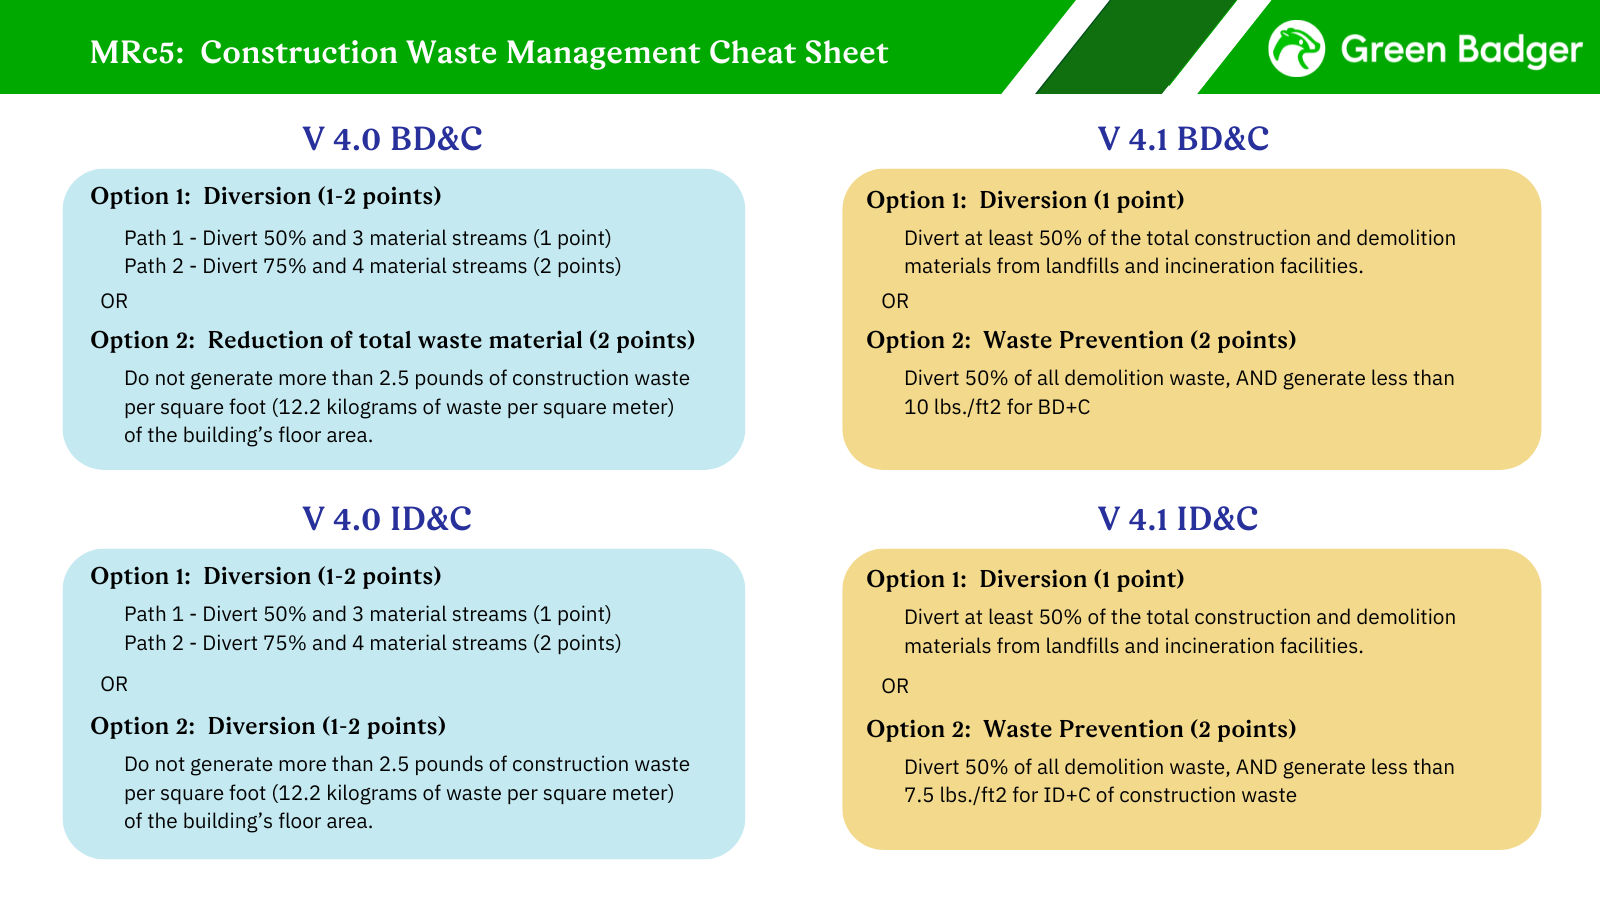 Guide to Construction Waste Management